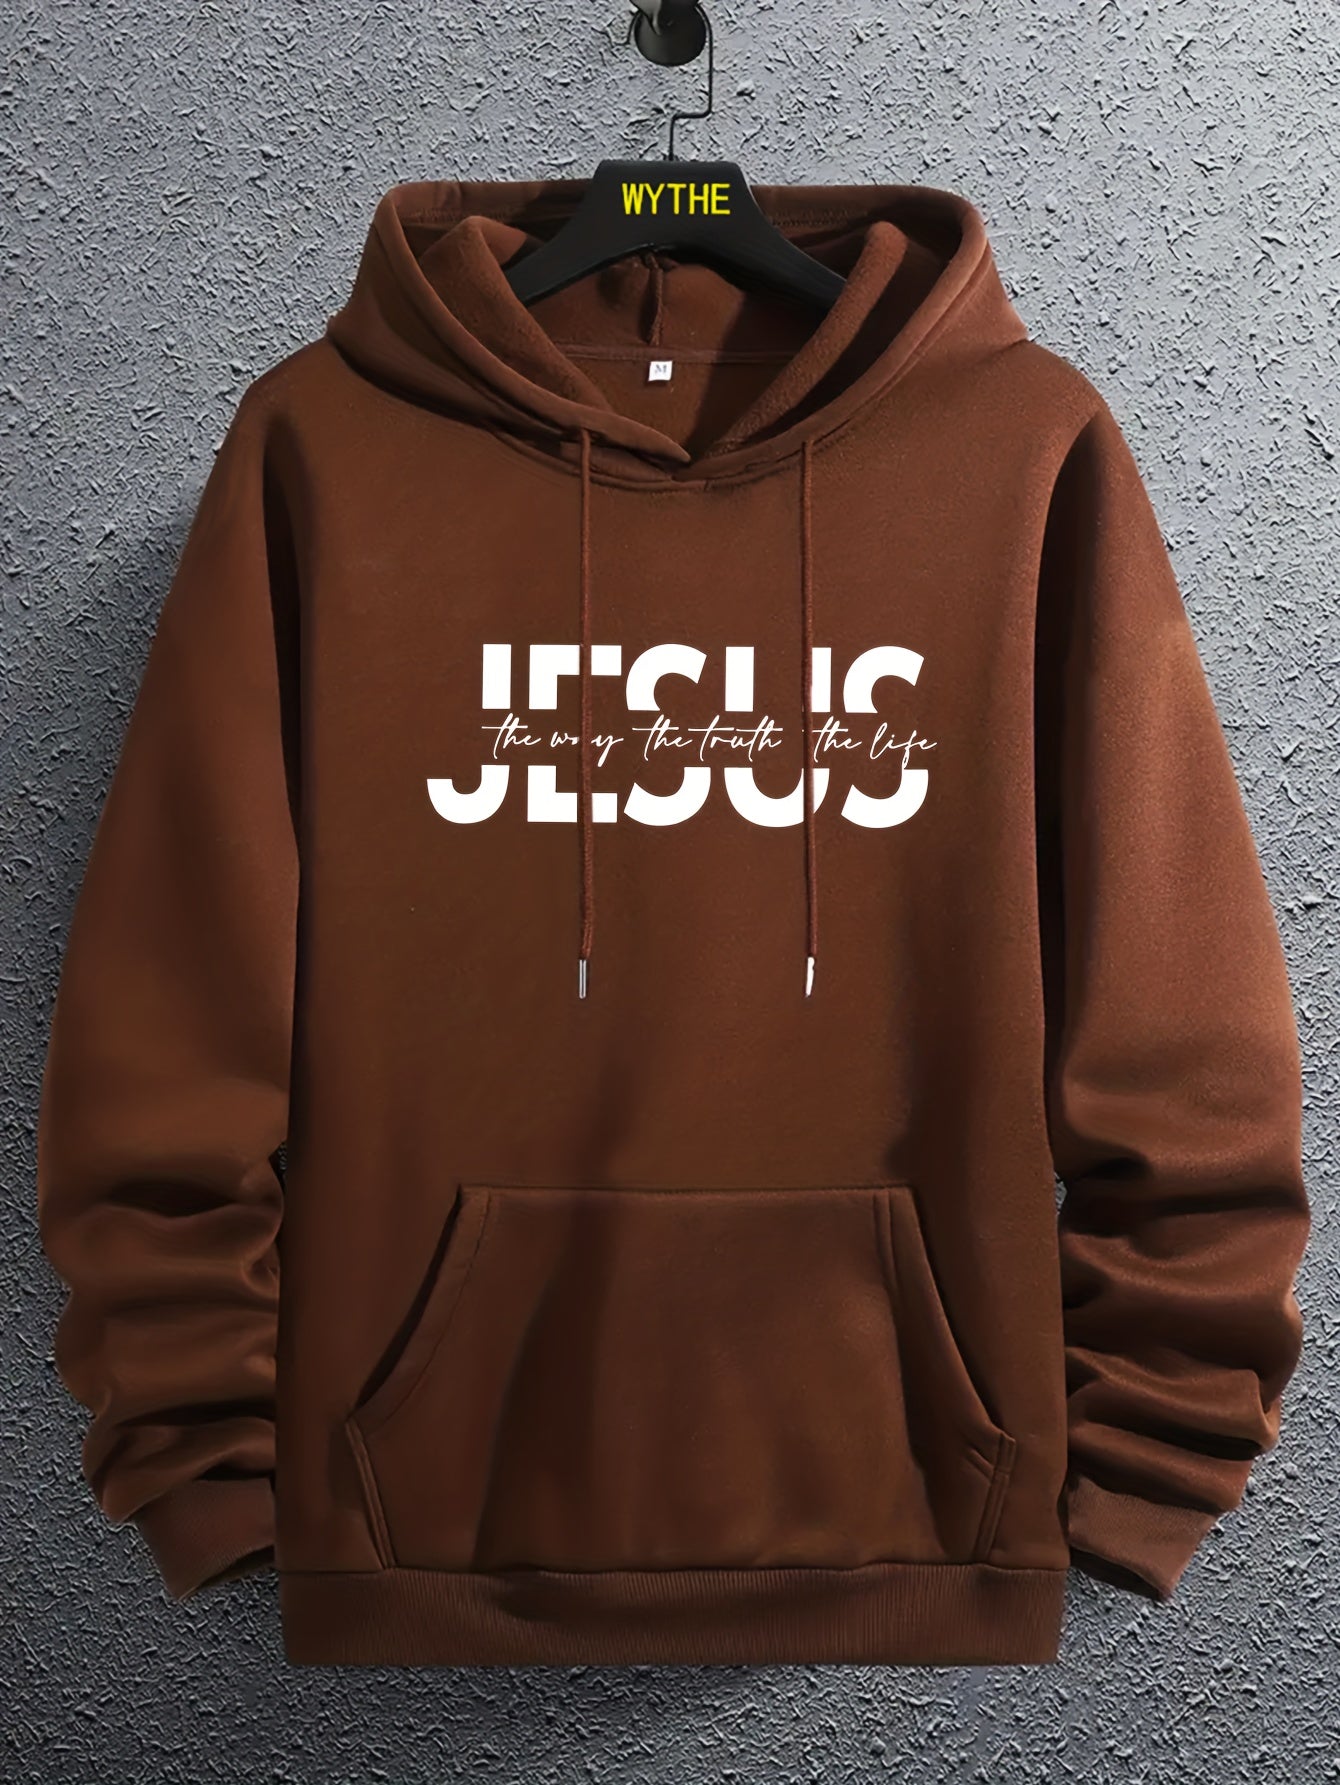 "JESUS" Print, Hoodies For Men, Graphic Sweatshirt With Kangaroo Pocket, Comfy Trendy Hooded Pullover, Mens Clothing For Fall Winter